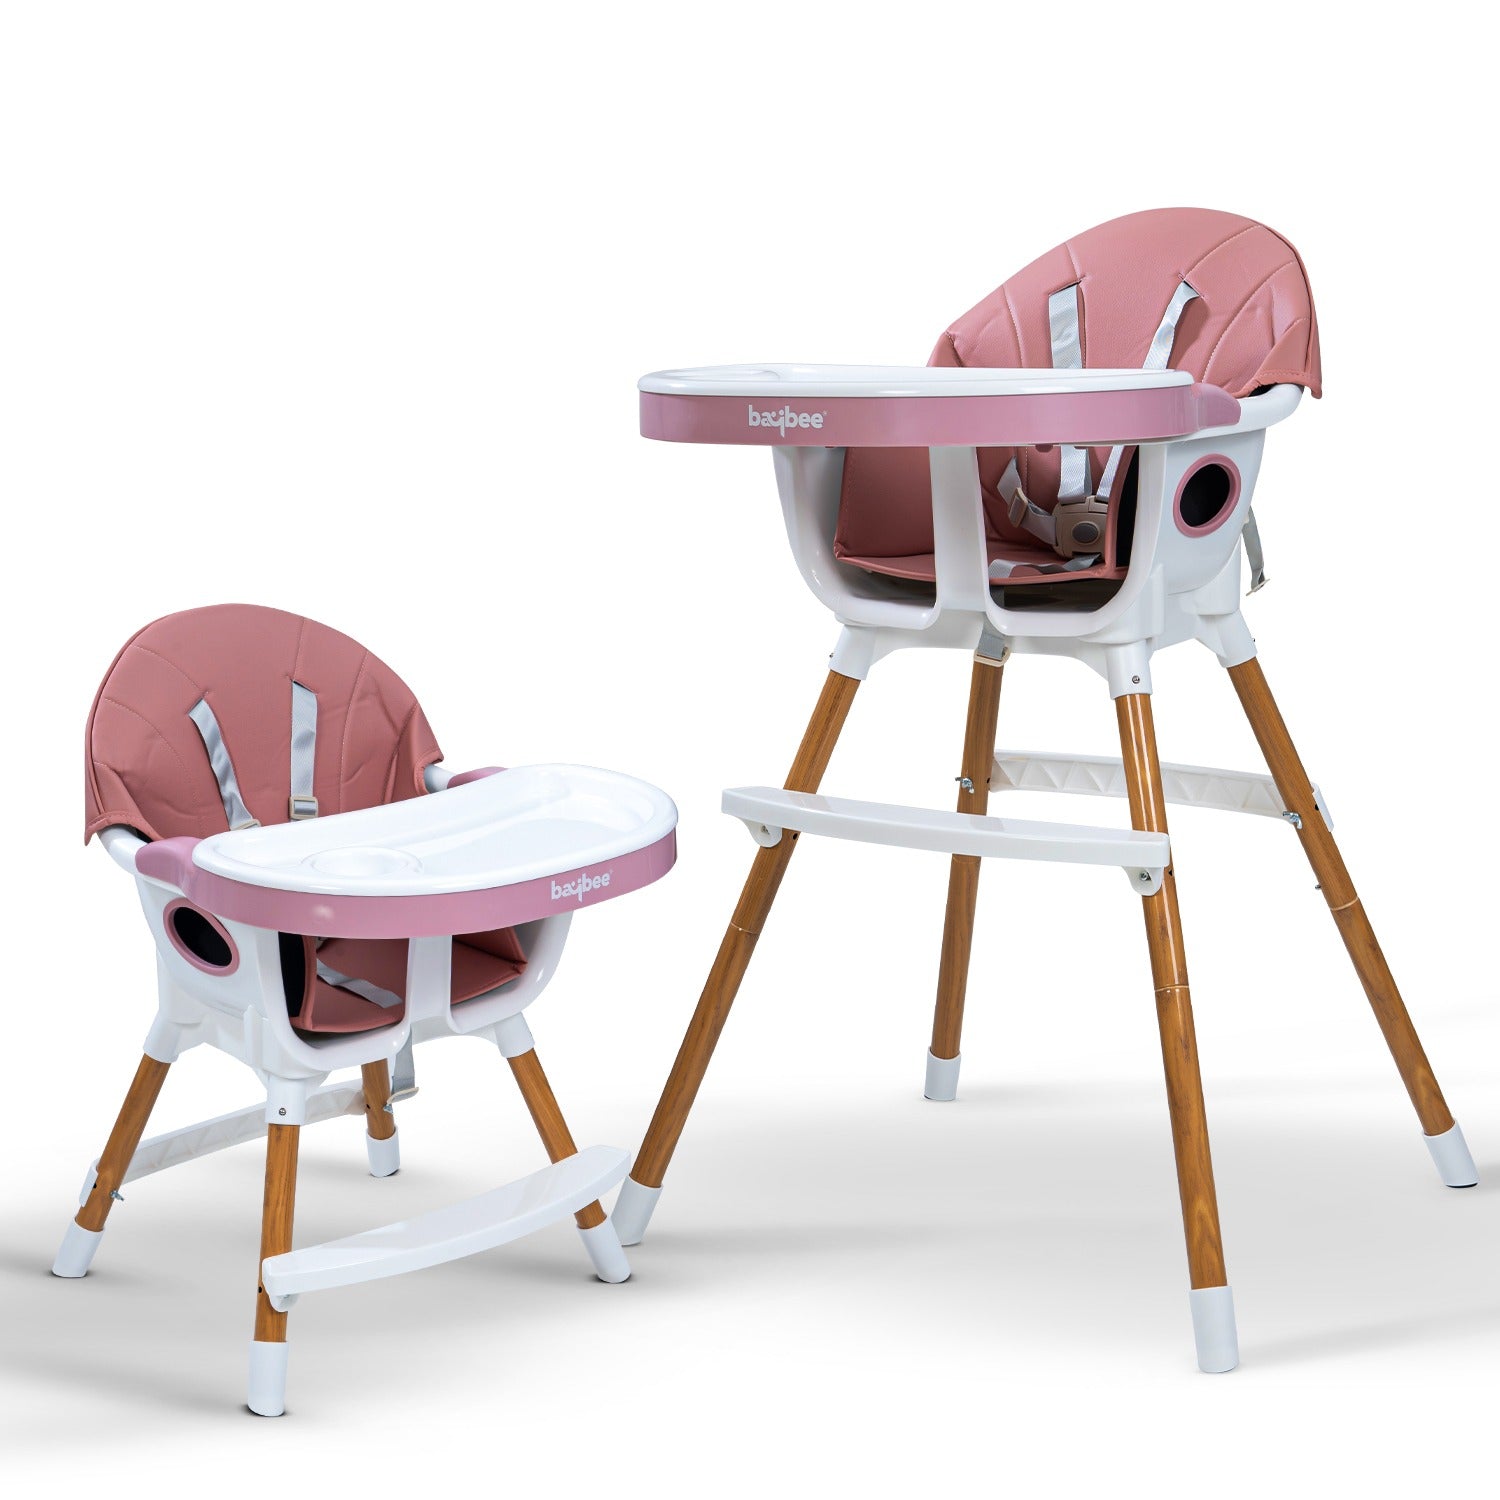 Minikin 2 in 1 Hades High Chair cum Low Chair I Wooden Finish Stainless Steel Base I 6 Months - 3 Years